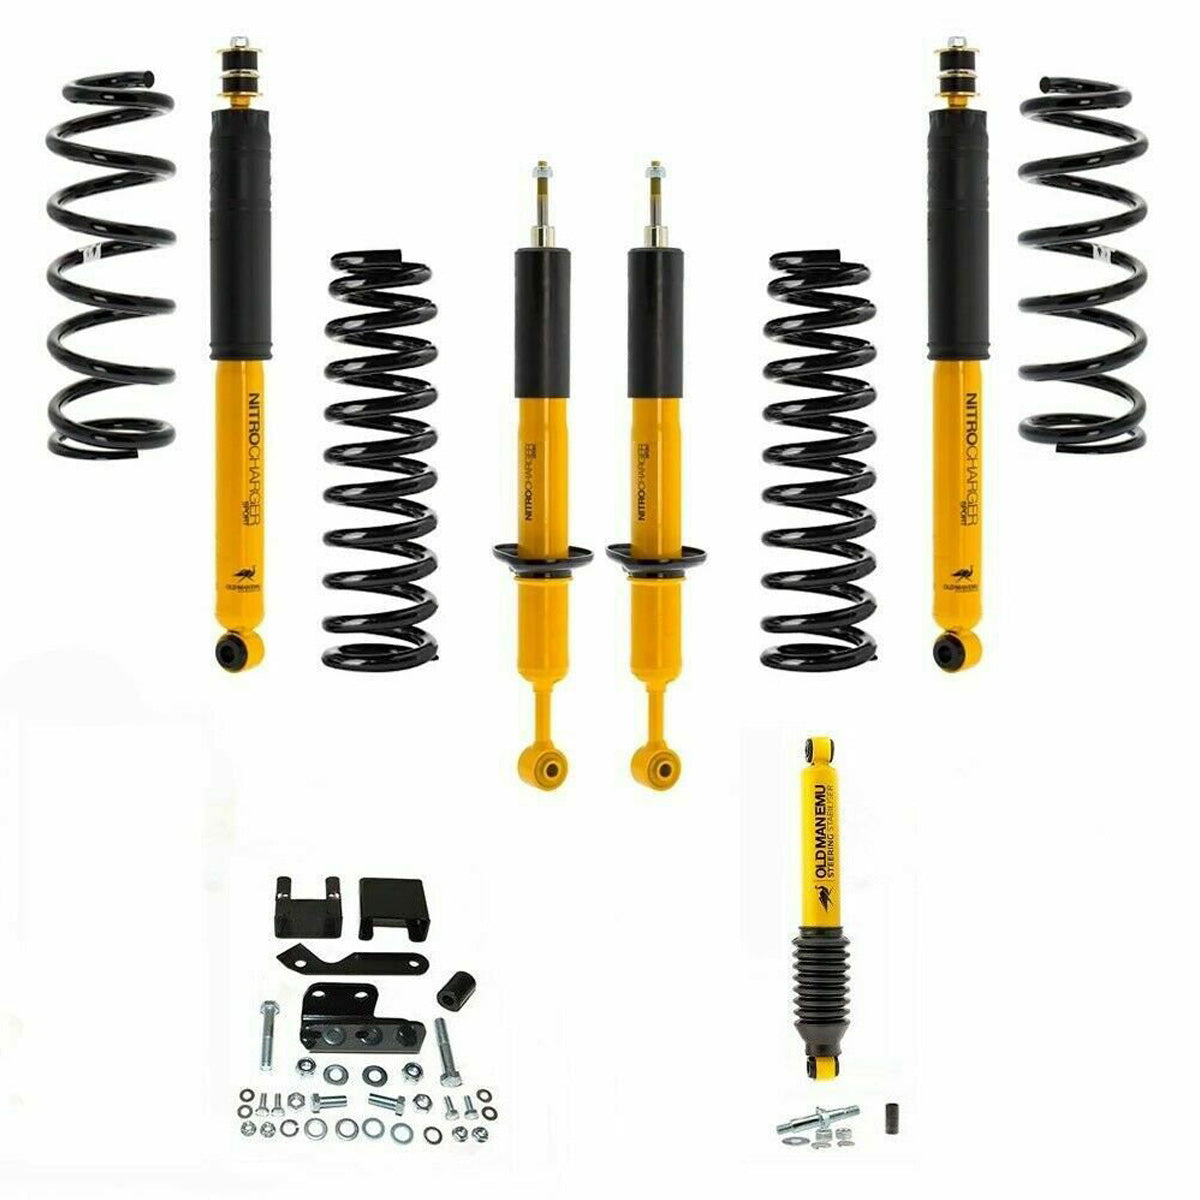 A suspension system, with the OME 3 inch Lift Kit for Wrangler JK 2 Door (07-18), to improve ground clearance.